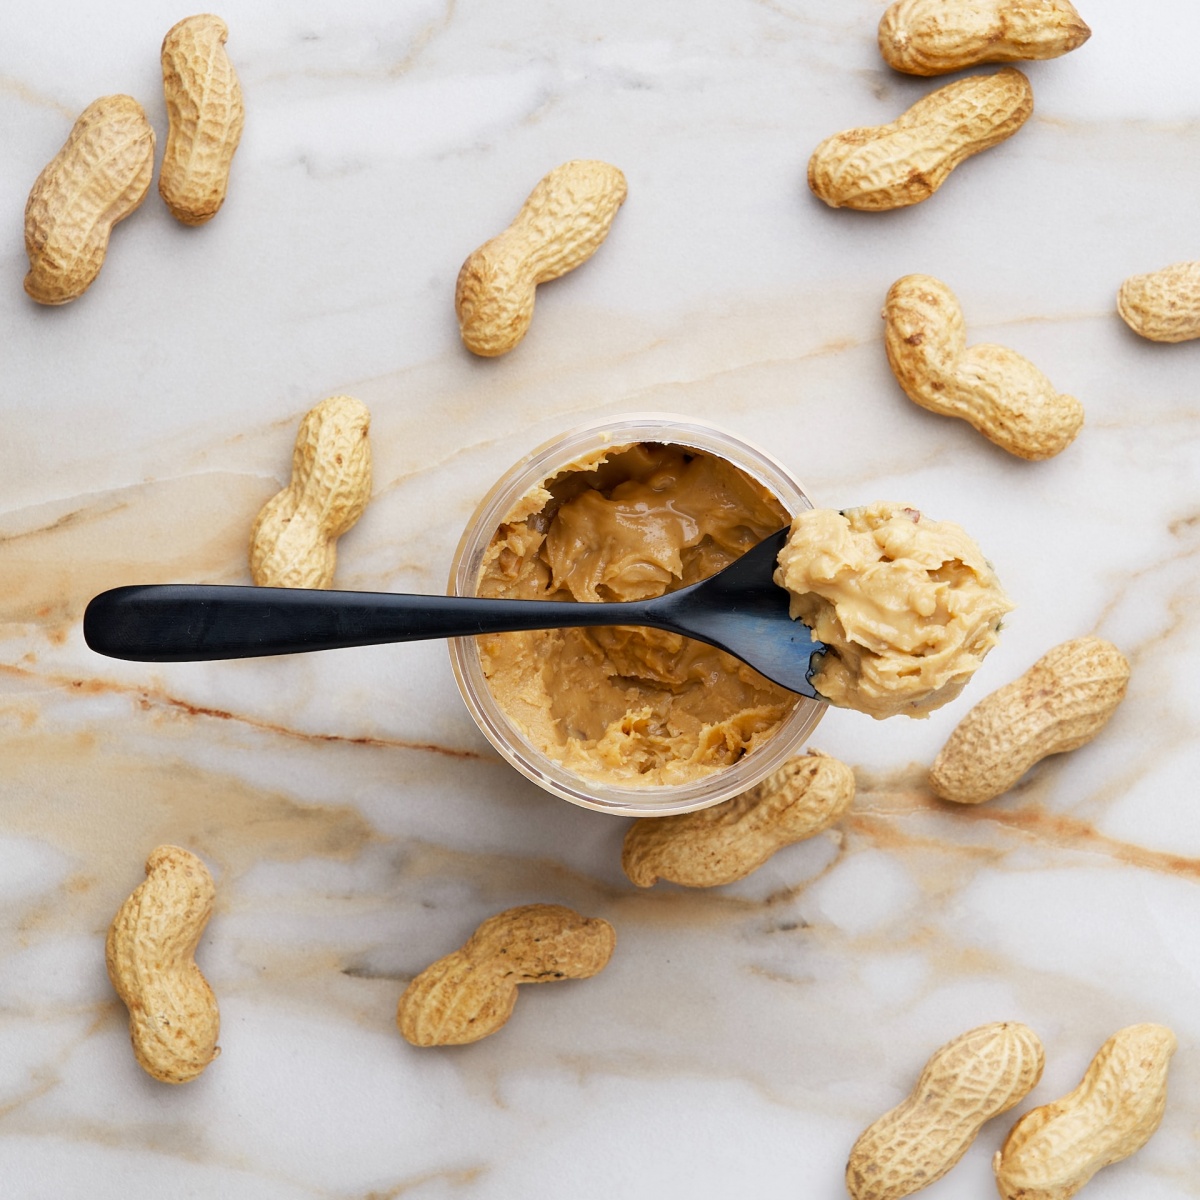 Arachibutyrophobia: What’s Wrong With Peanut Butter?